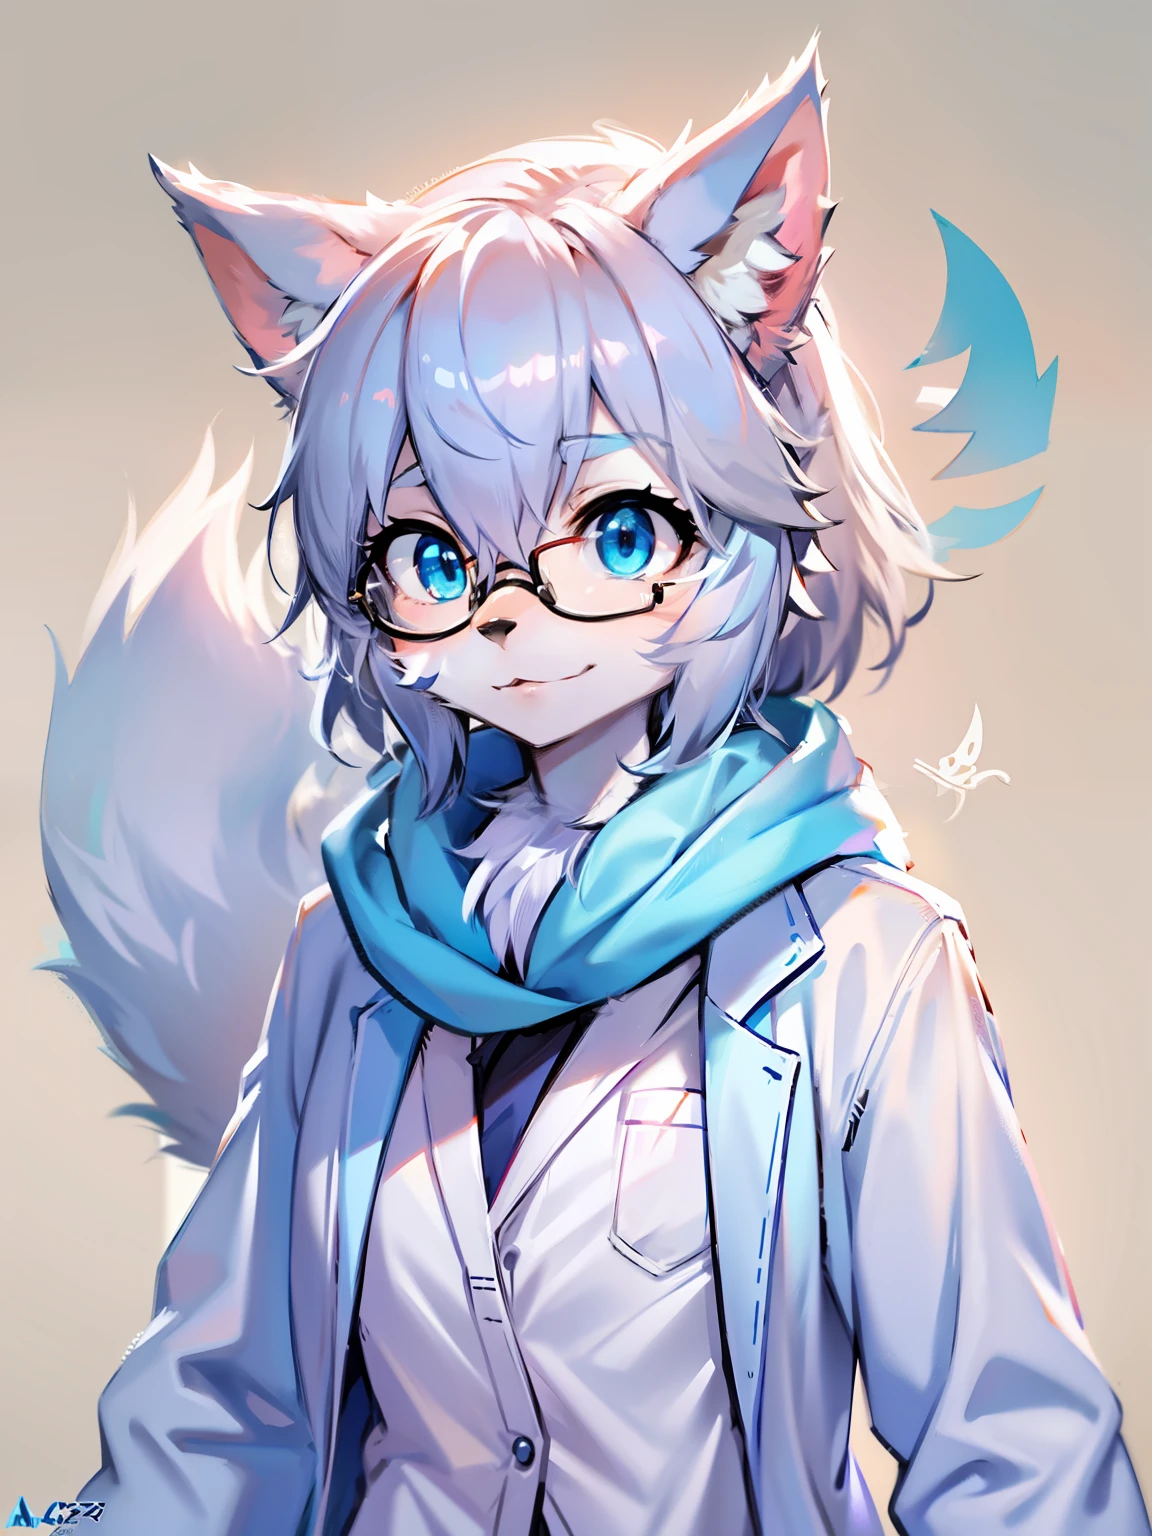 Anime character with arctic fox ears wearing lab coat and blue scarf,Arctic fox with fluffy blue fur and tail,Wear half-rimmed glasses,  Fox scientist, professional furry drawing